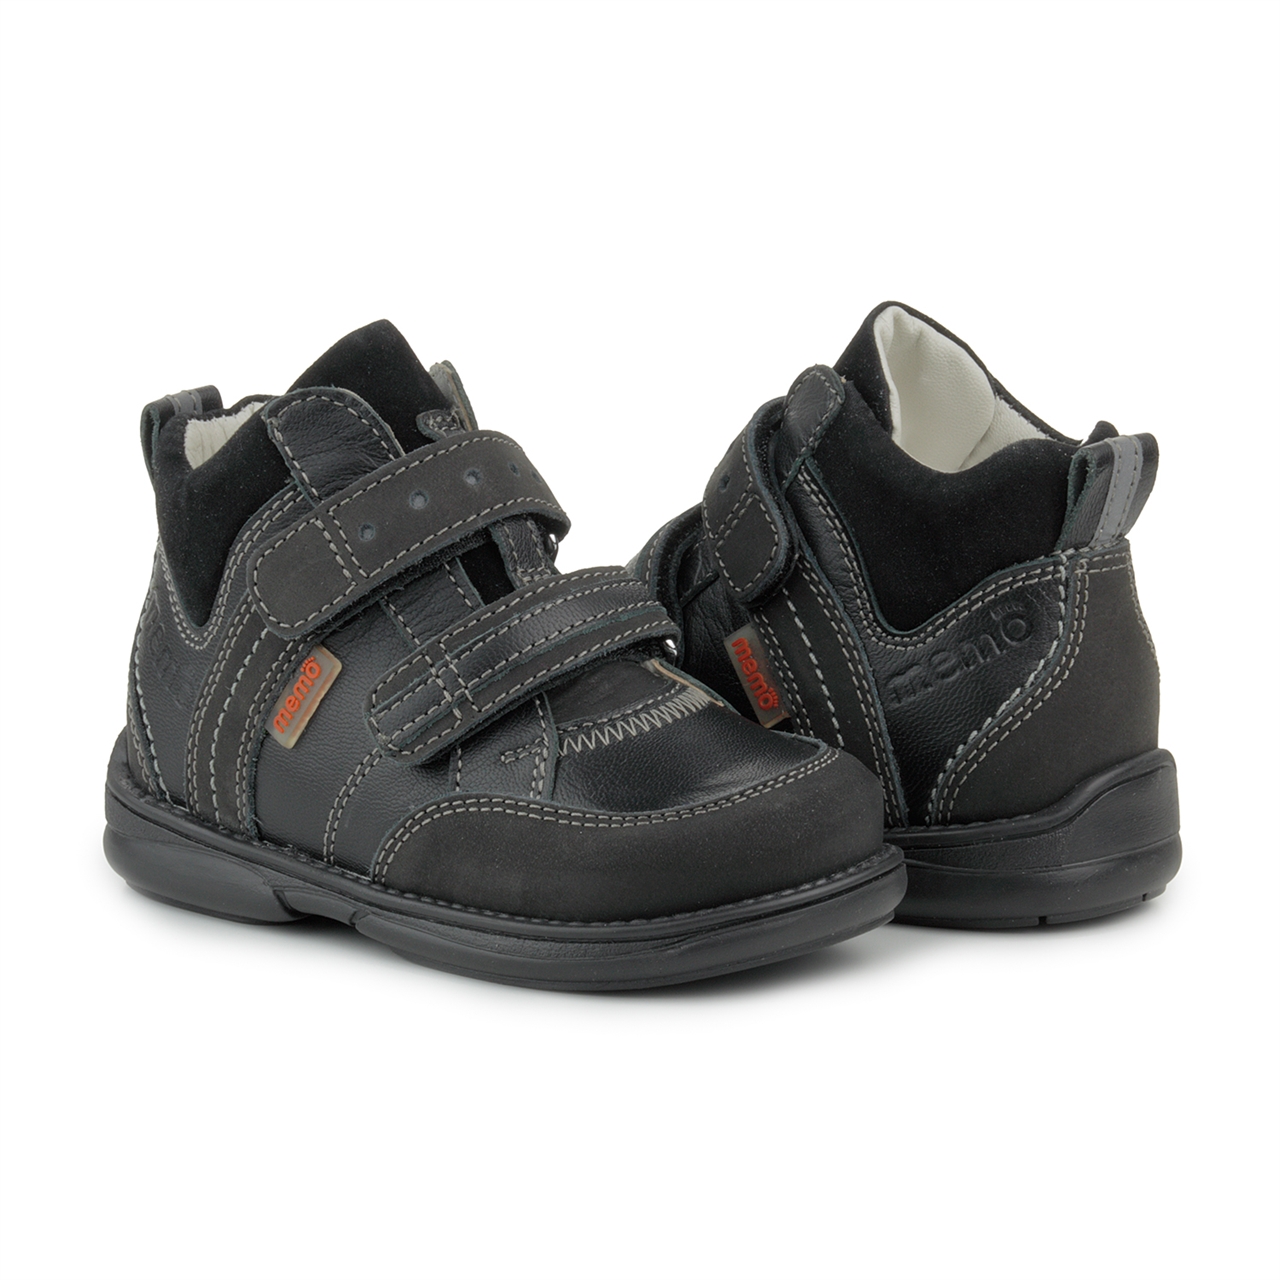 black velcro shoes for toddlers